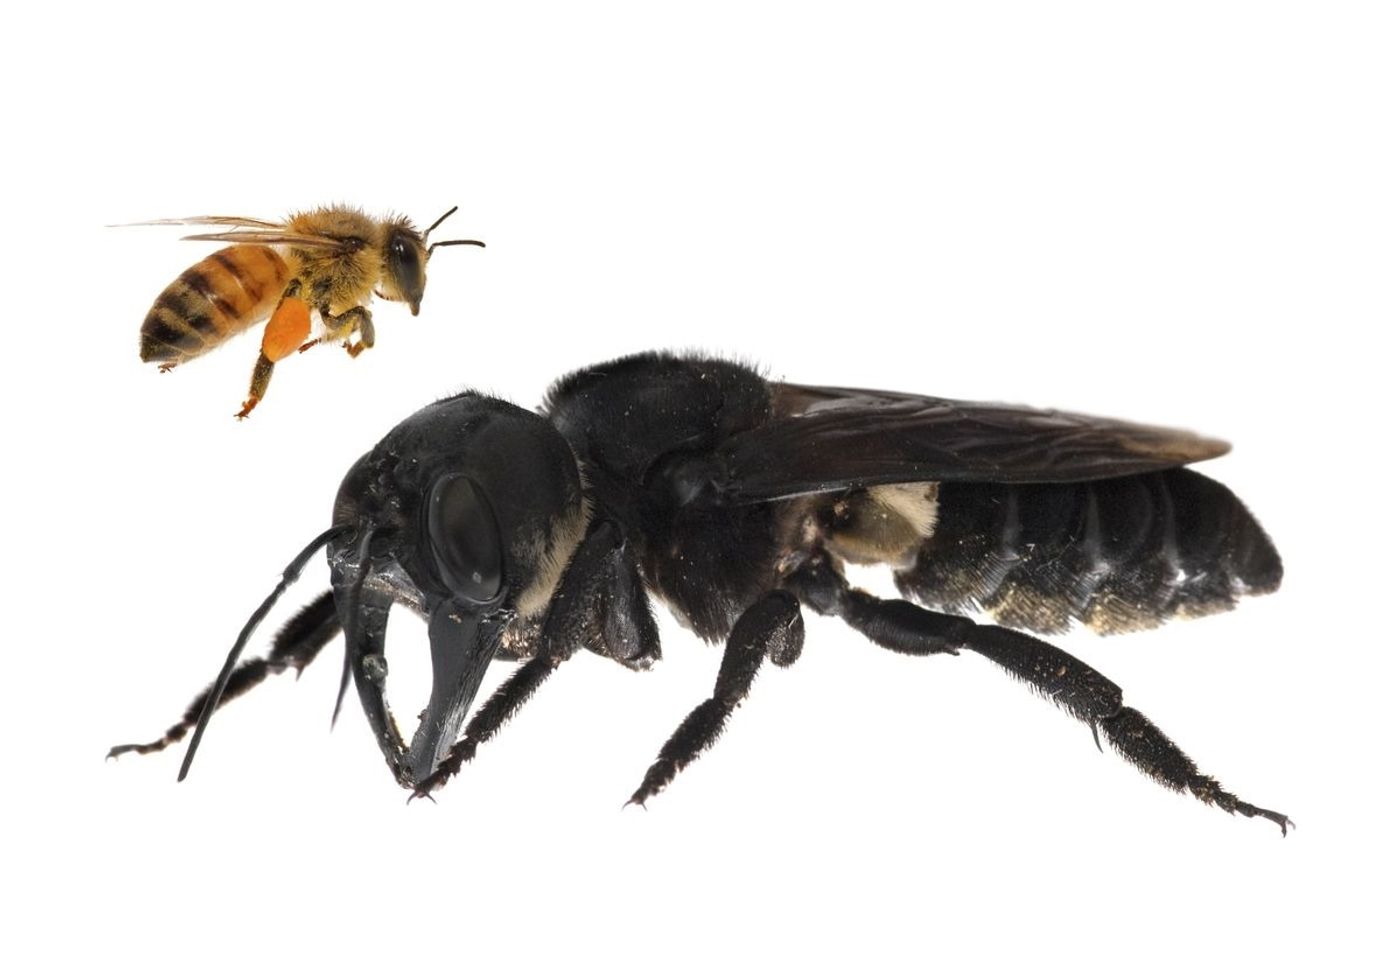 A comparison in size between Wallace's giant bee and a standard bee.